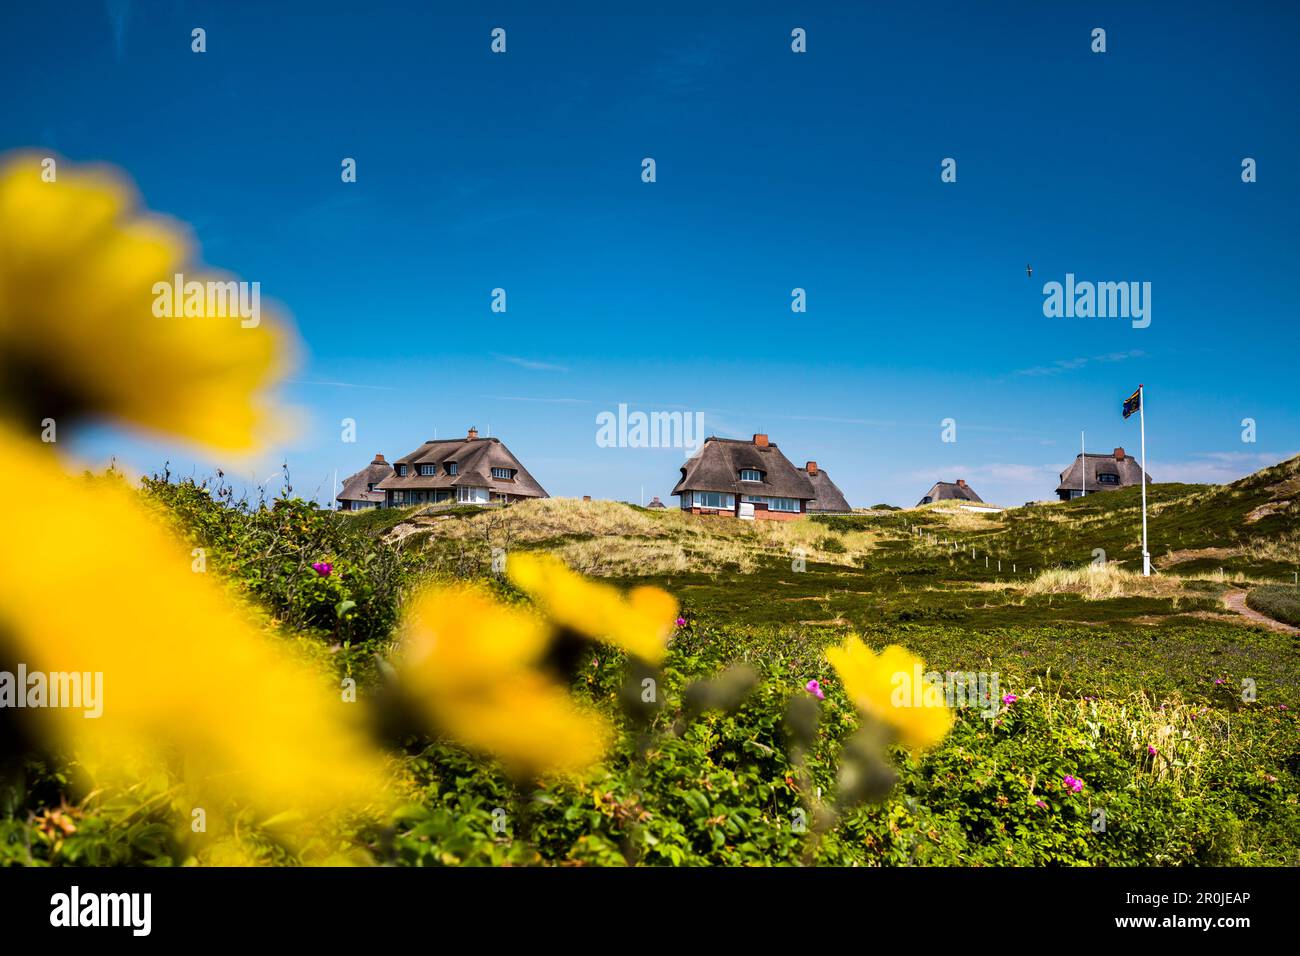 Thatched houses in the dunes, Hoernum, Sylt Island, North Frisian Islands, Schleswig-Holstein, Germany Stock Photo